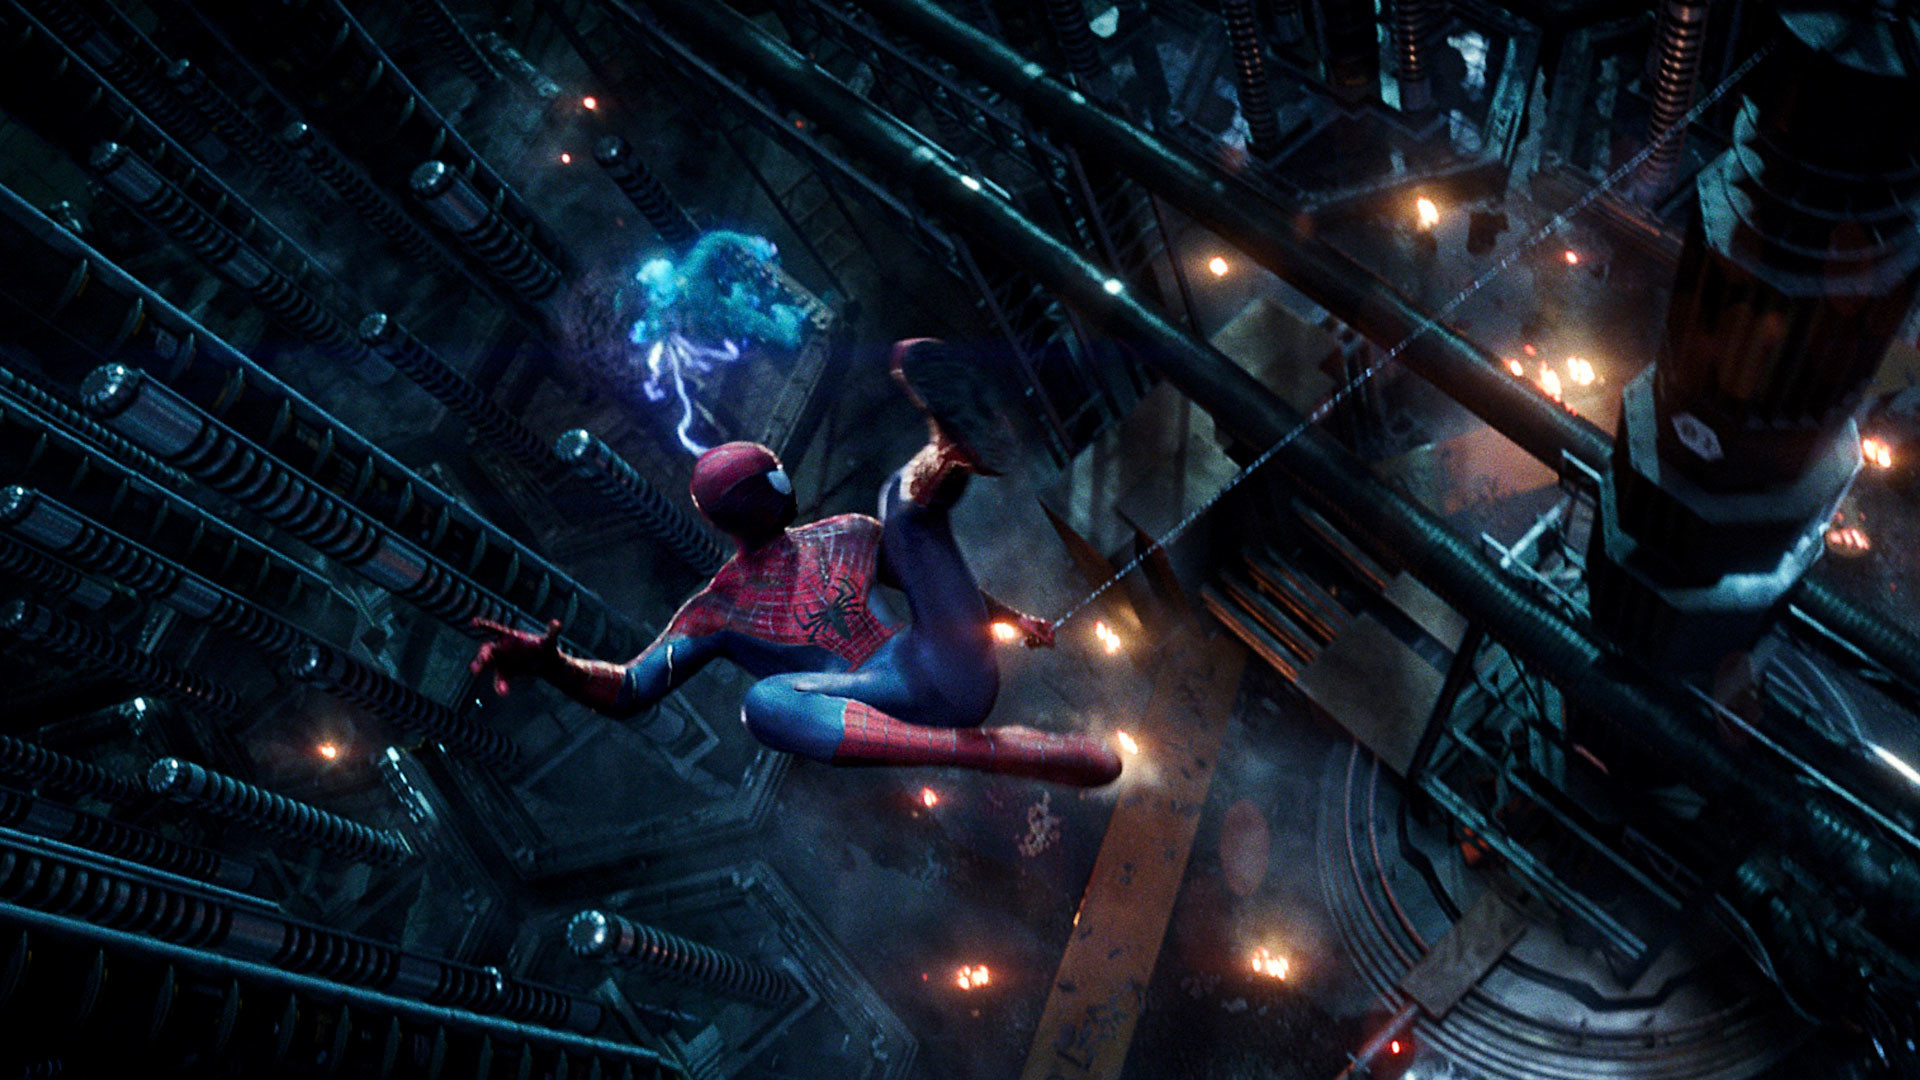 1920x1080 hd pics photos best flying spiderman hollywood movie hd quality desktop  background wallpaper